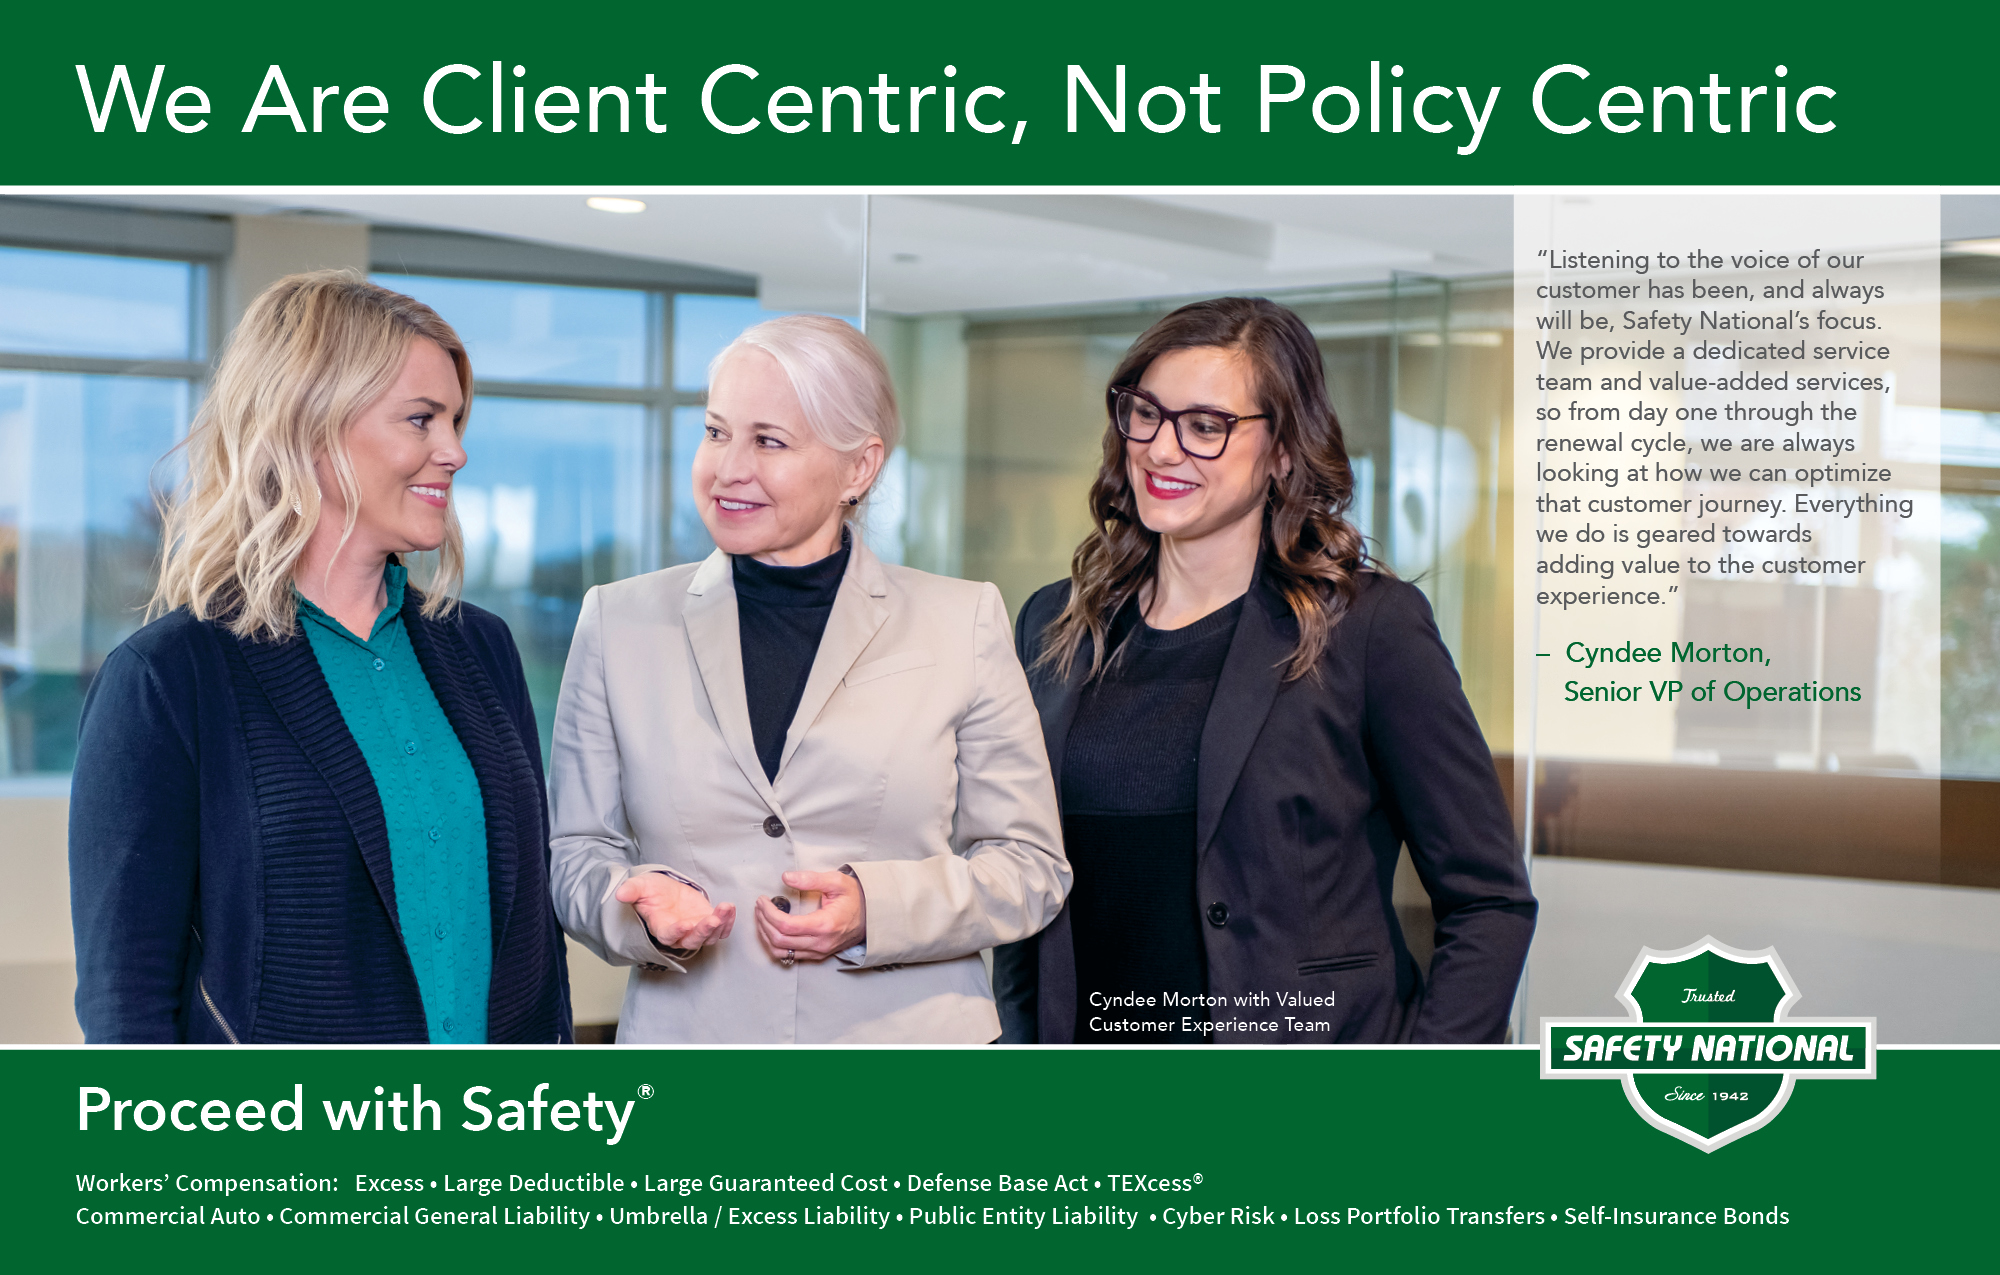 We Are Client Centric, Not Policy Centric